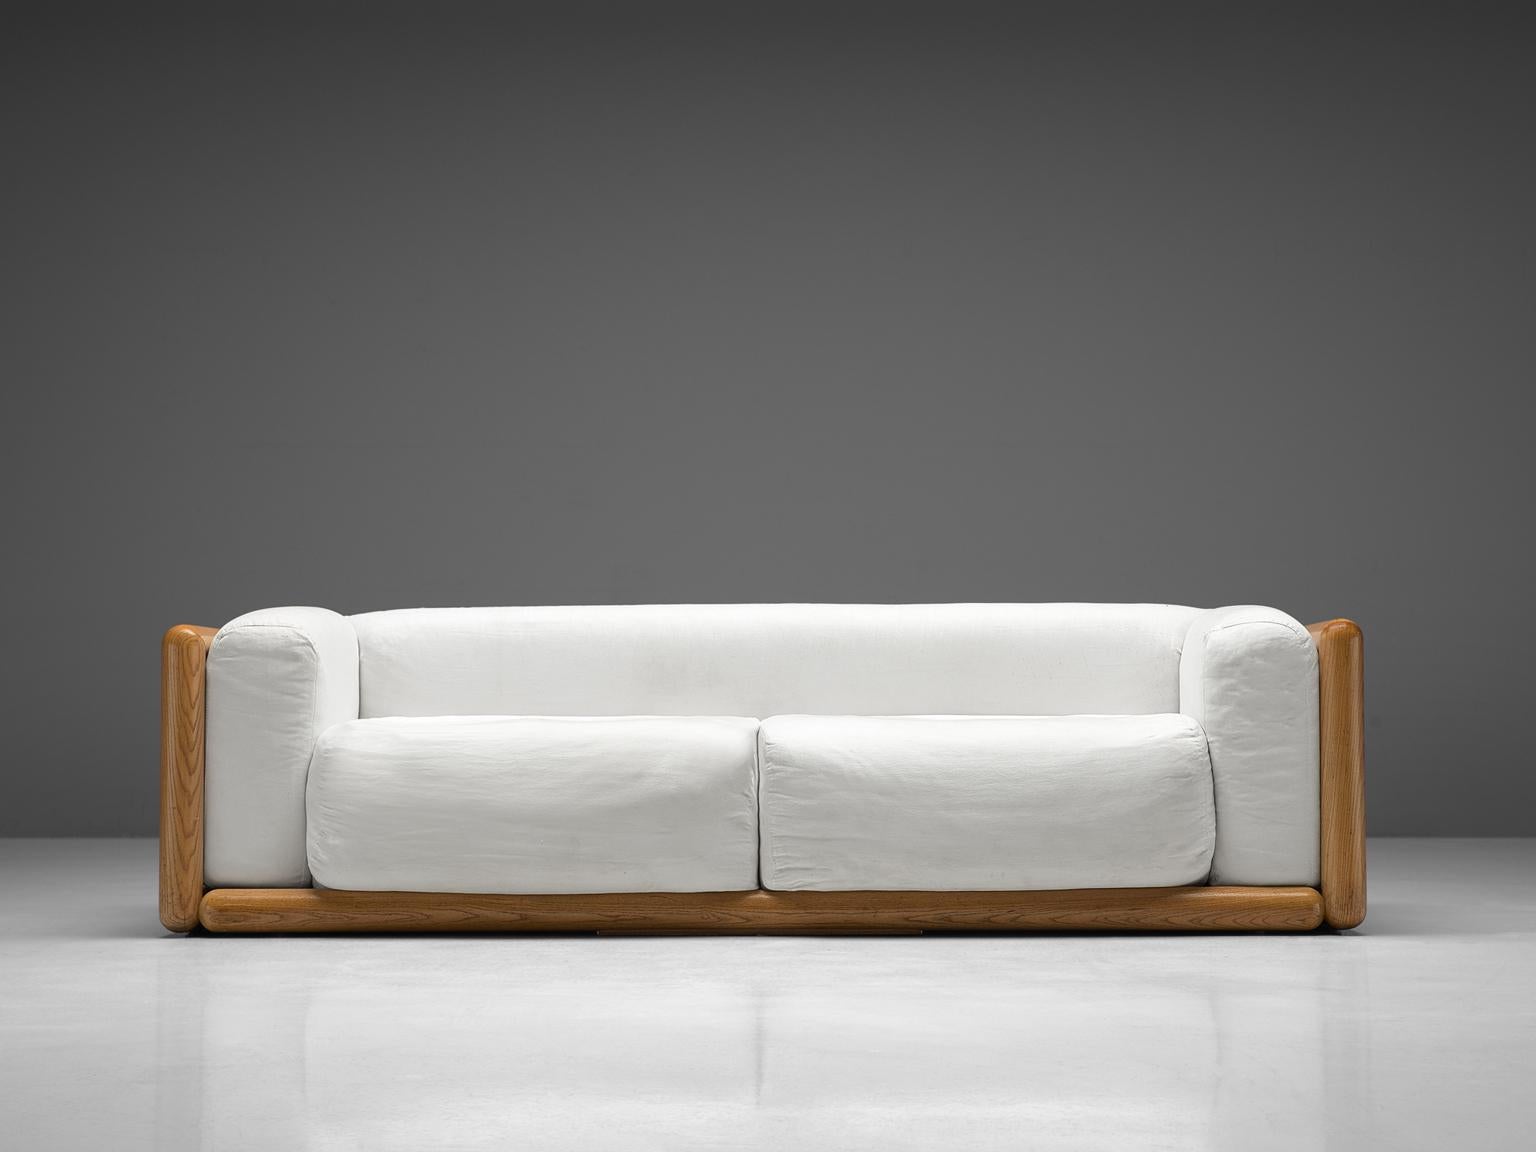 Carlo Scarpa for Simon, 'Cornaro' sofa, white fabric, ashwood, Italy, 1973

The sofa has a very thick cushion and is upholstered with white fabric. The piece have a relatively thin back and armrests compared to the seat. The frame is made out of a